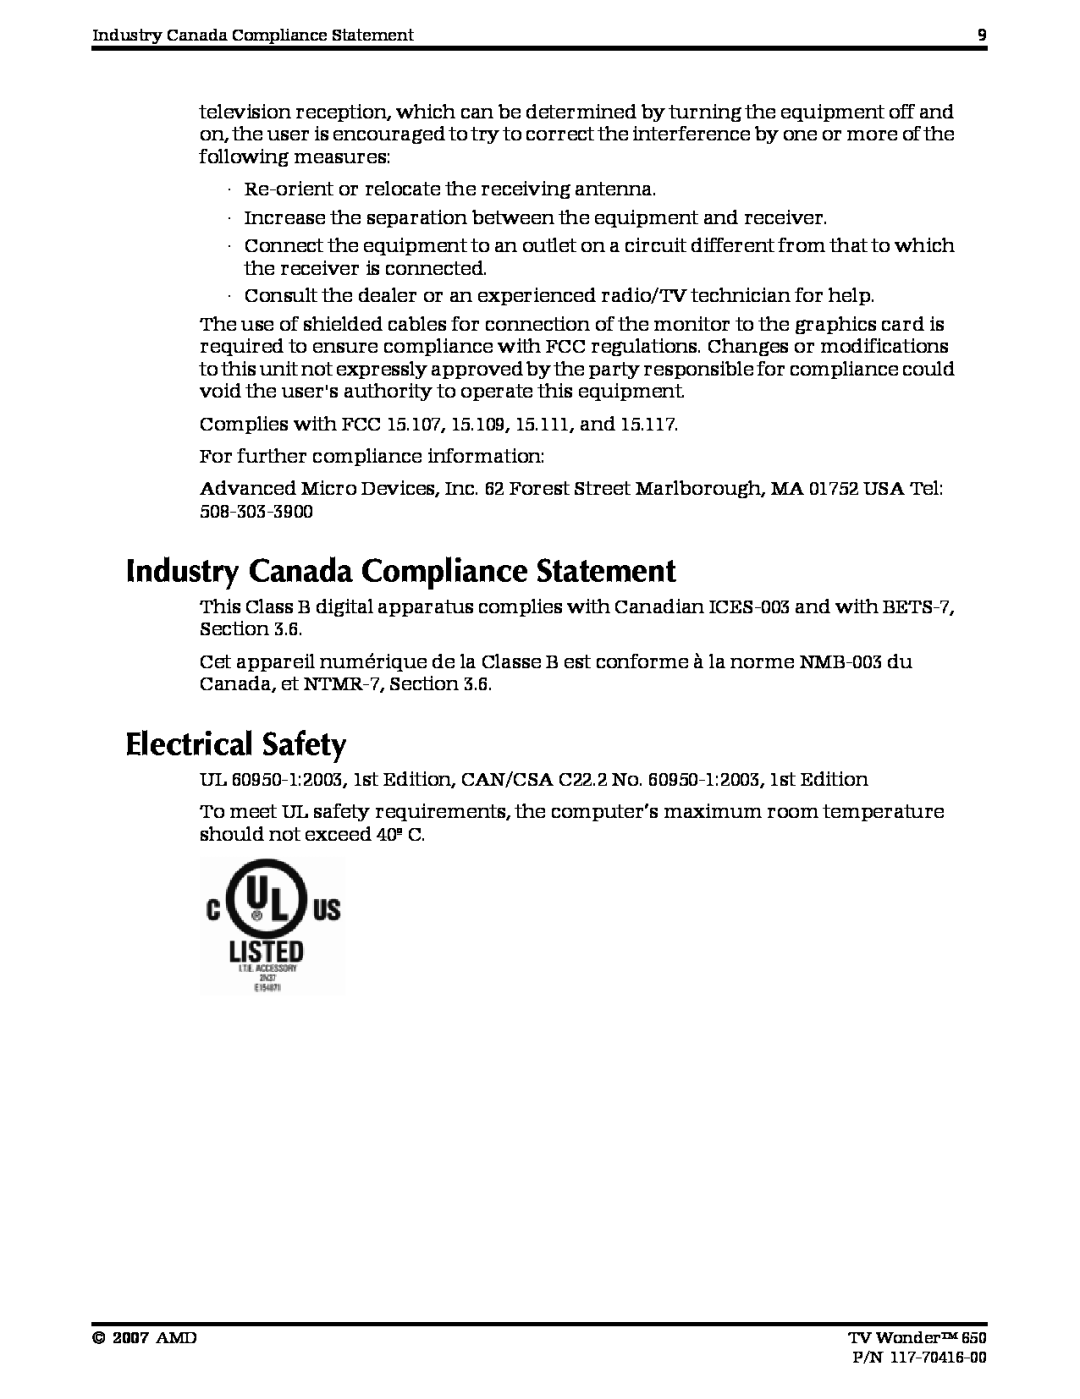 AMD 650 manual Industry Canada Compliance Statement, Electrical Safety 